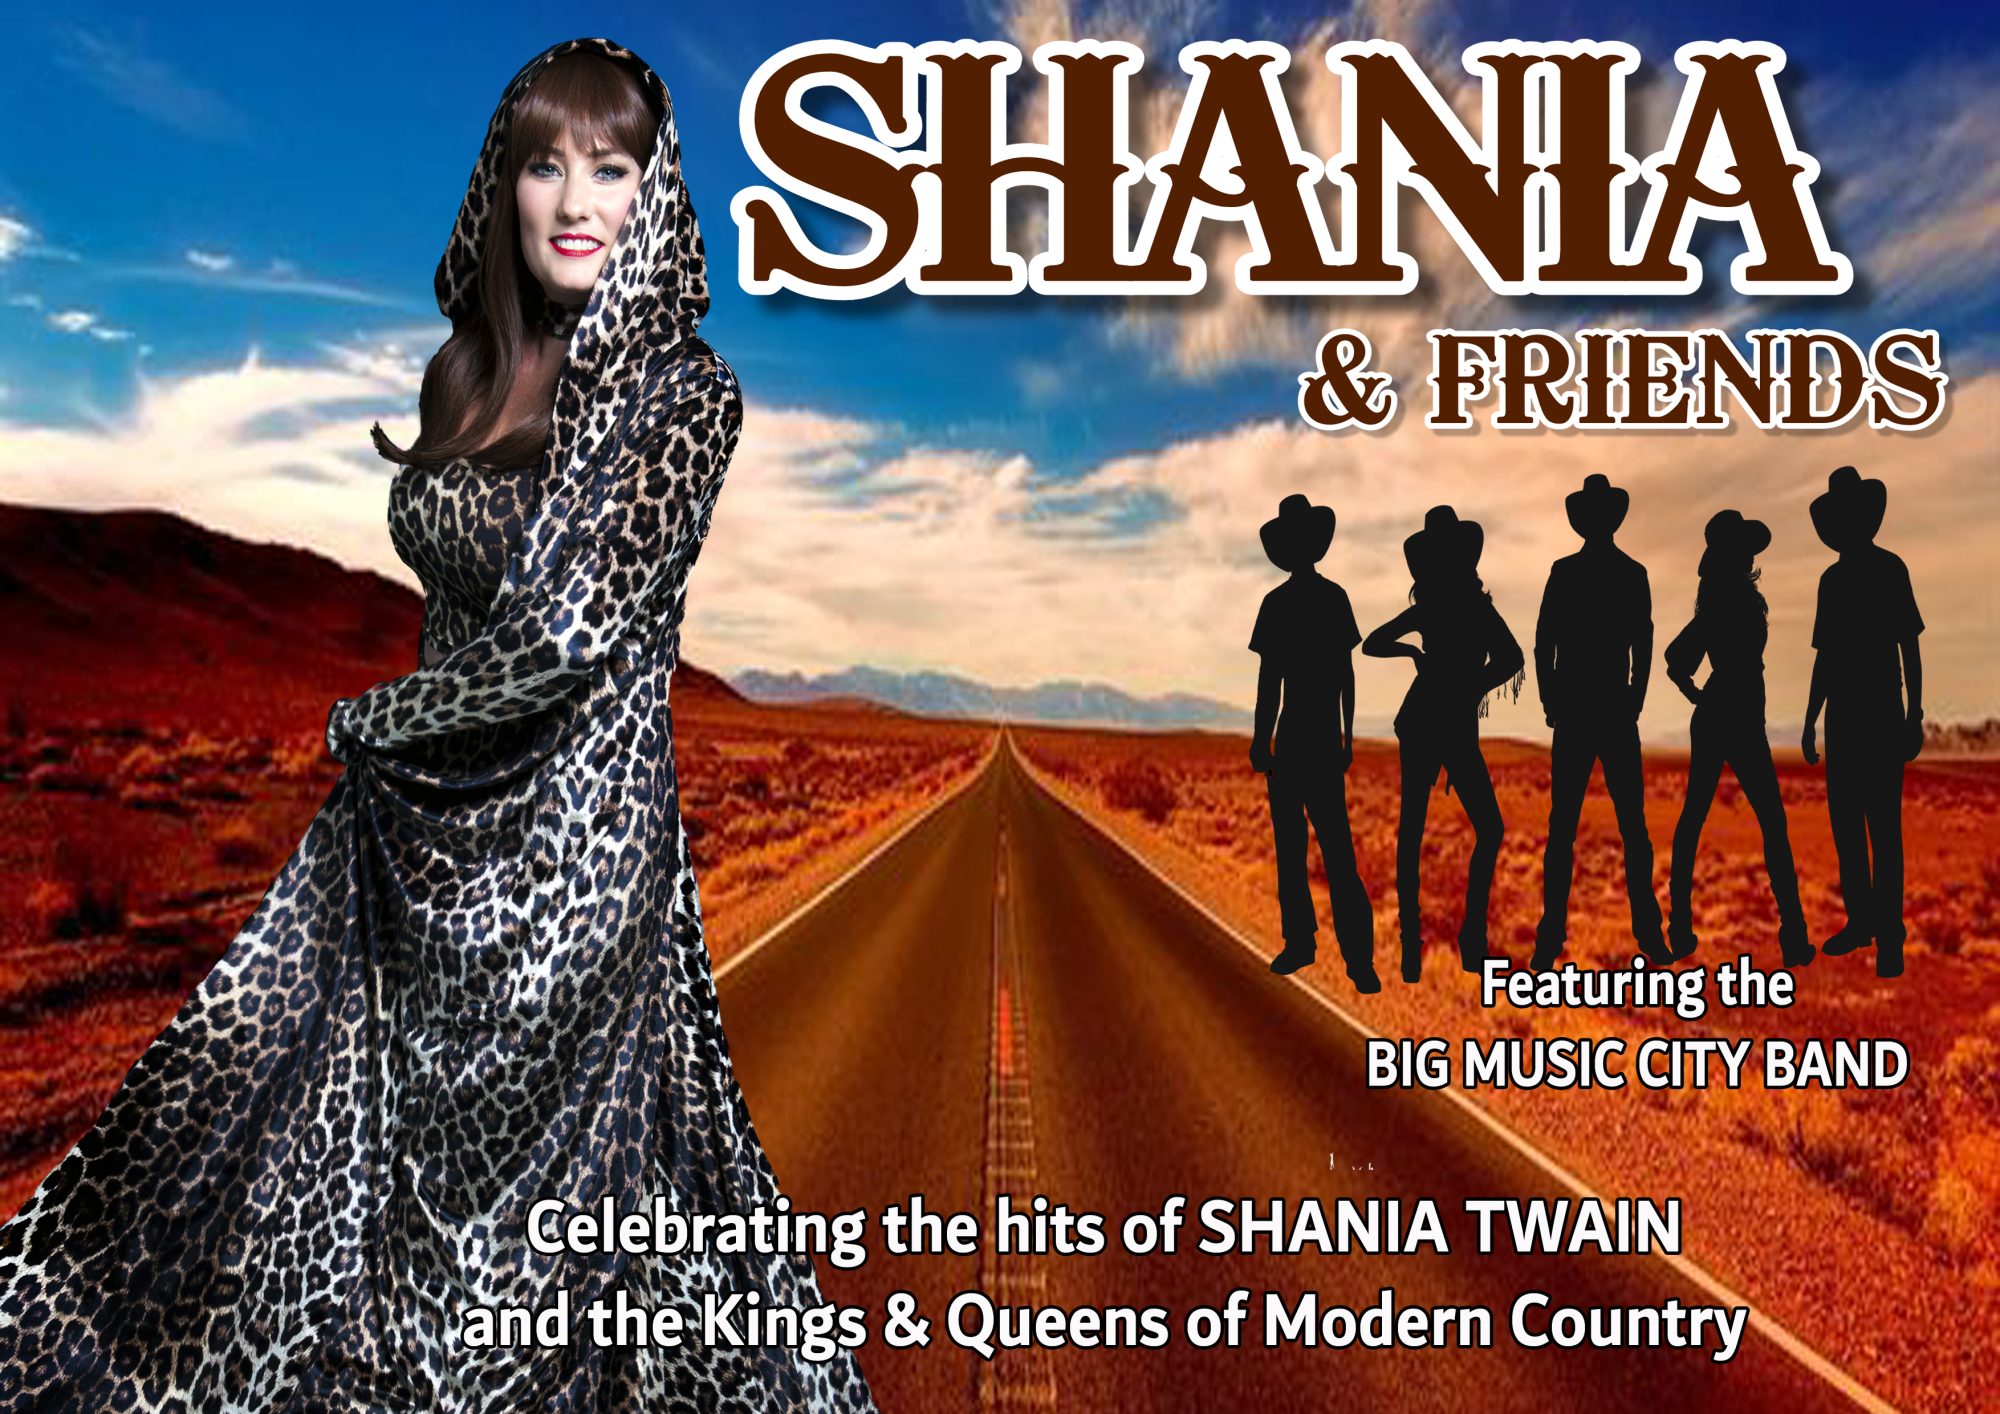 'Let's Rock This Country' with Shania & Friends